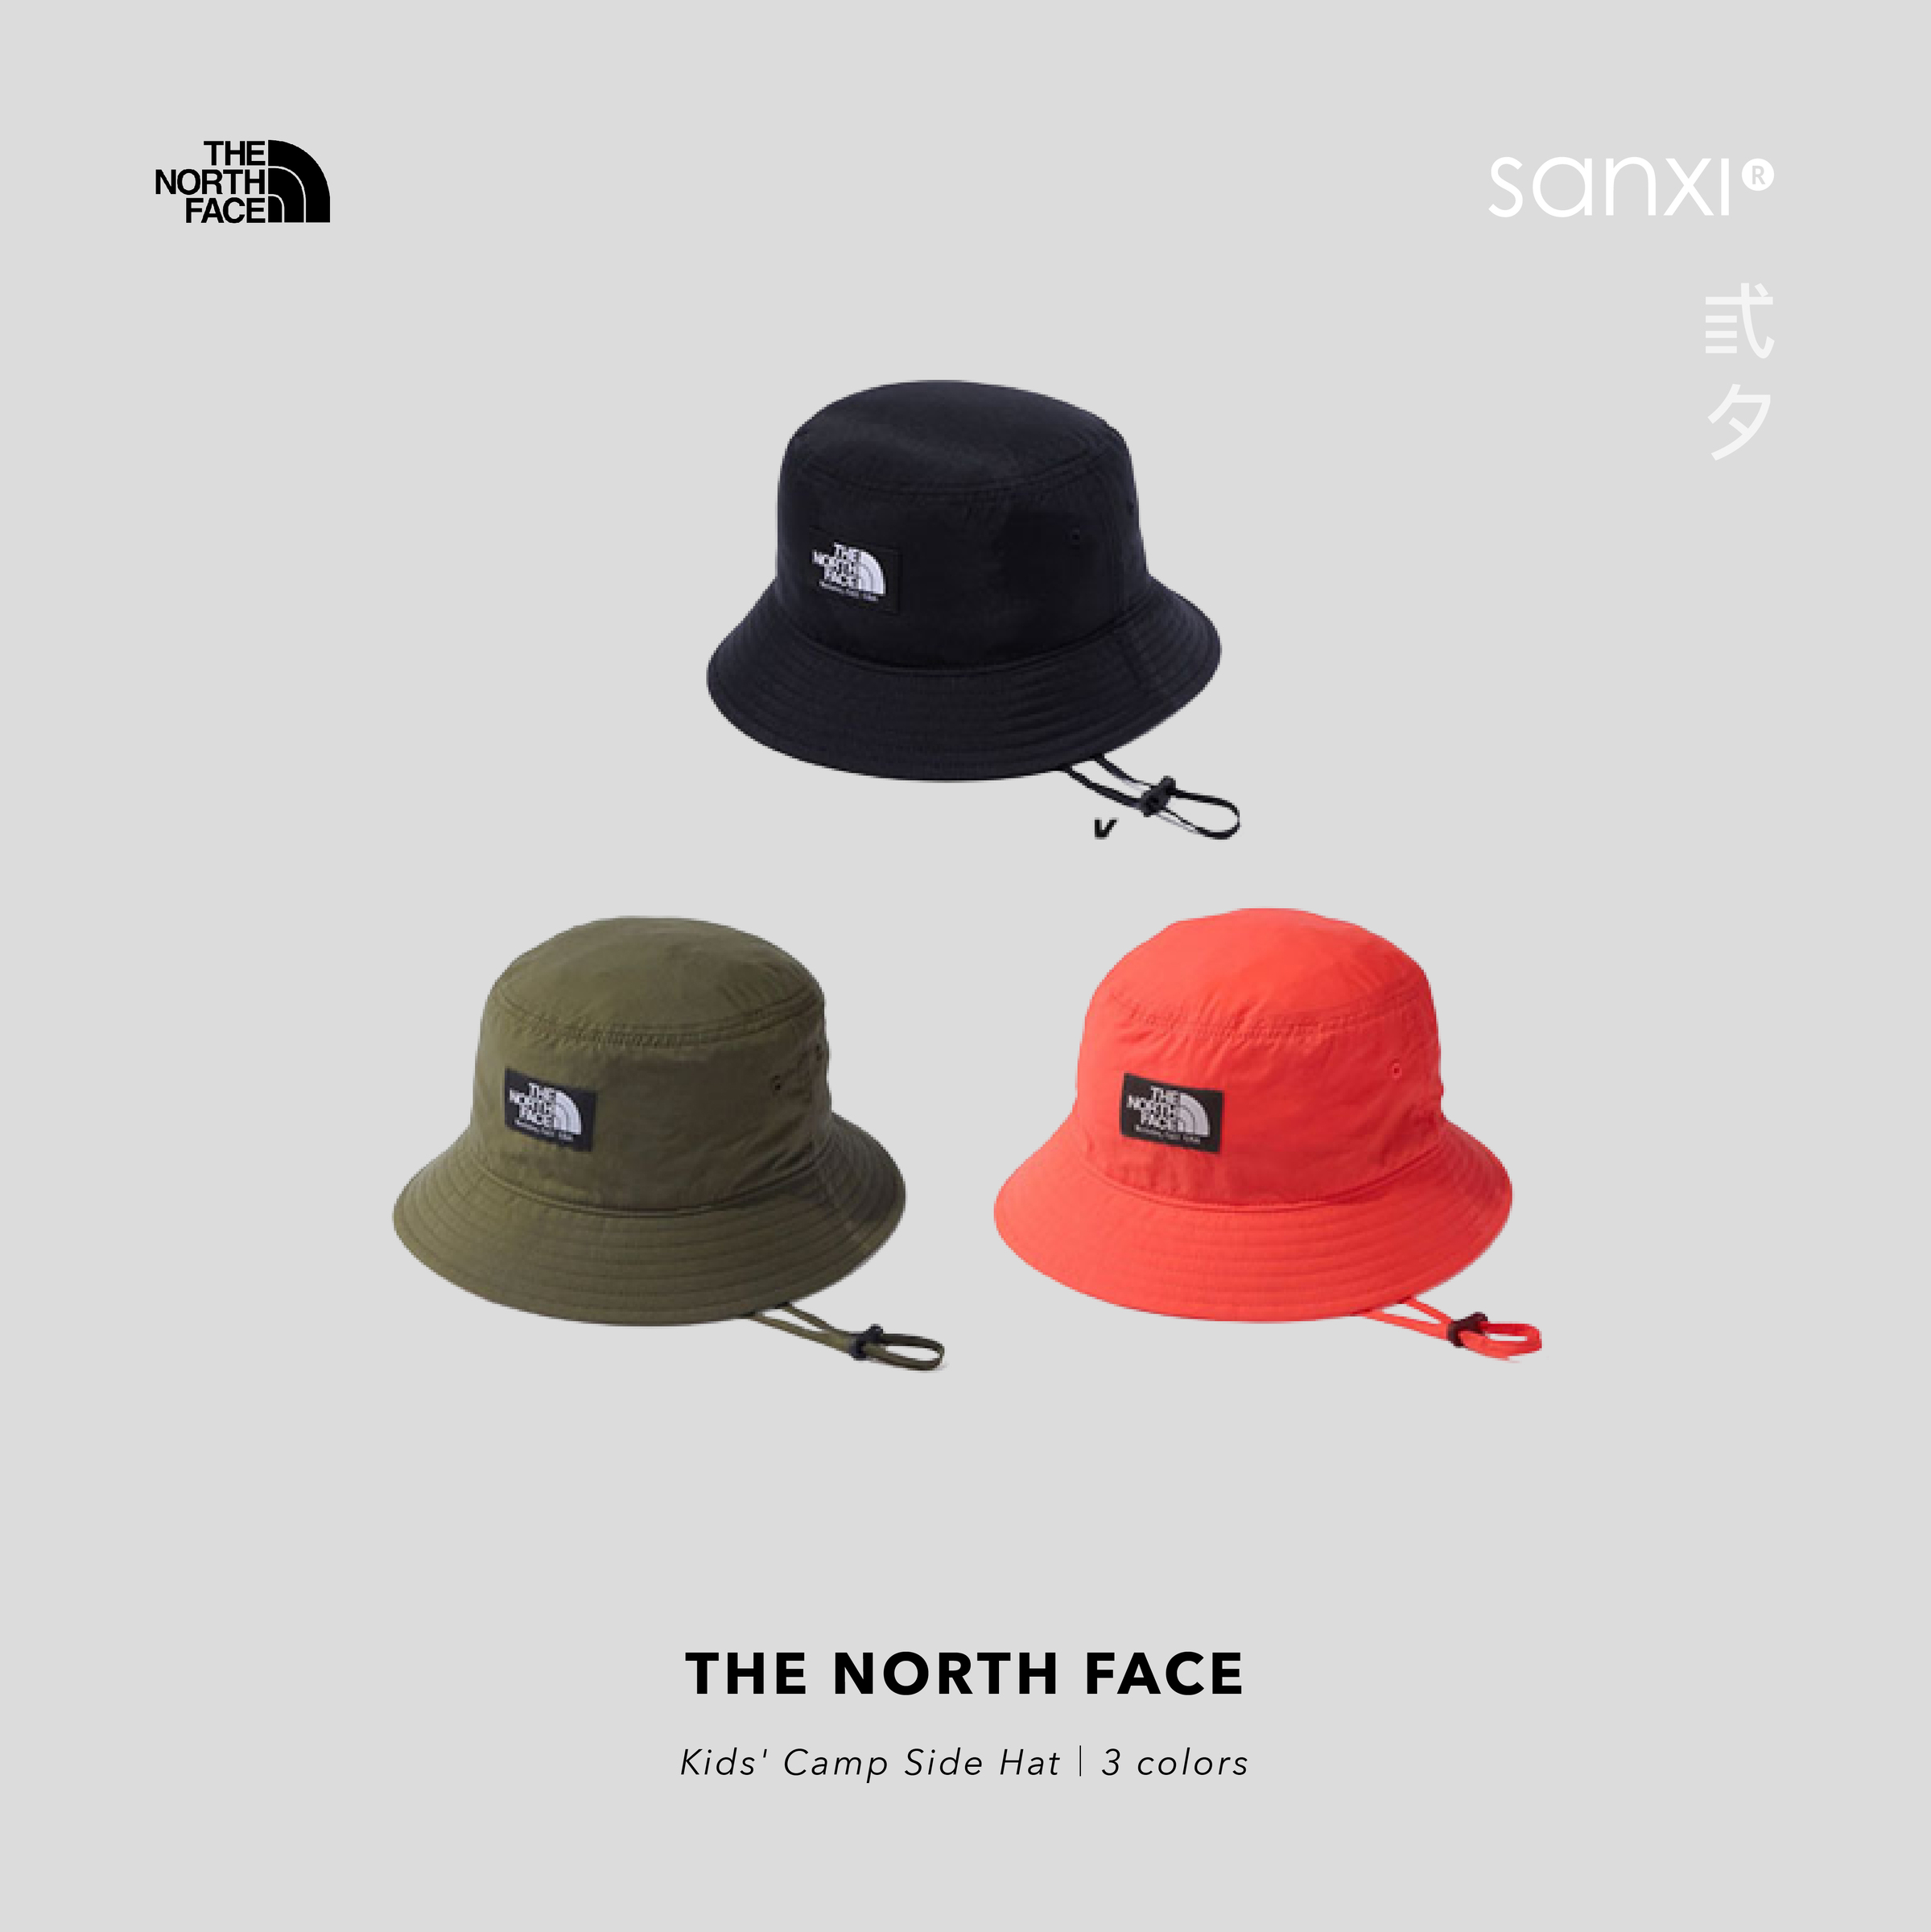 SANXI_商品圖｜TNF_THE NORTH FACE Kids' Camp Side Hat